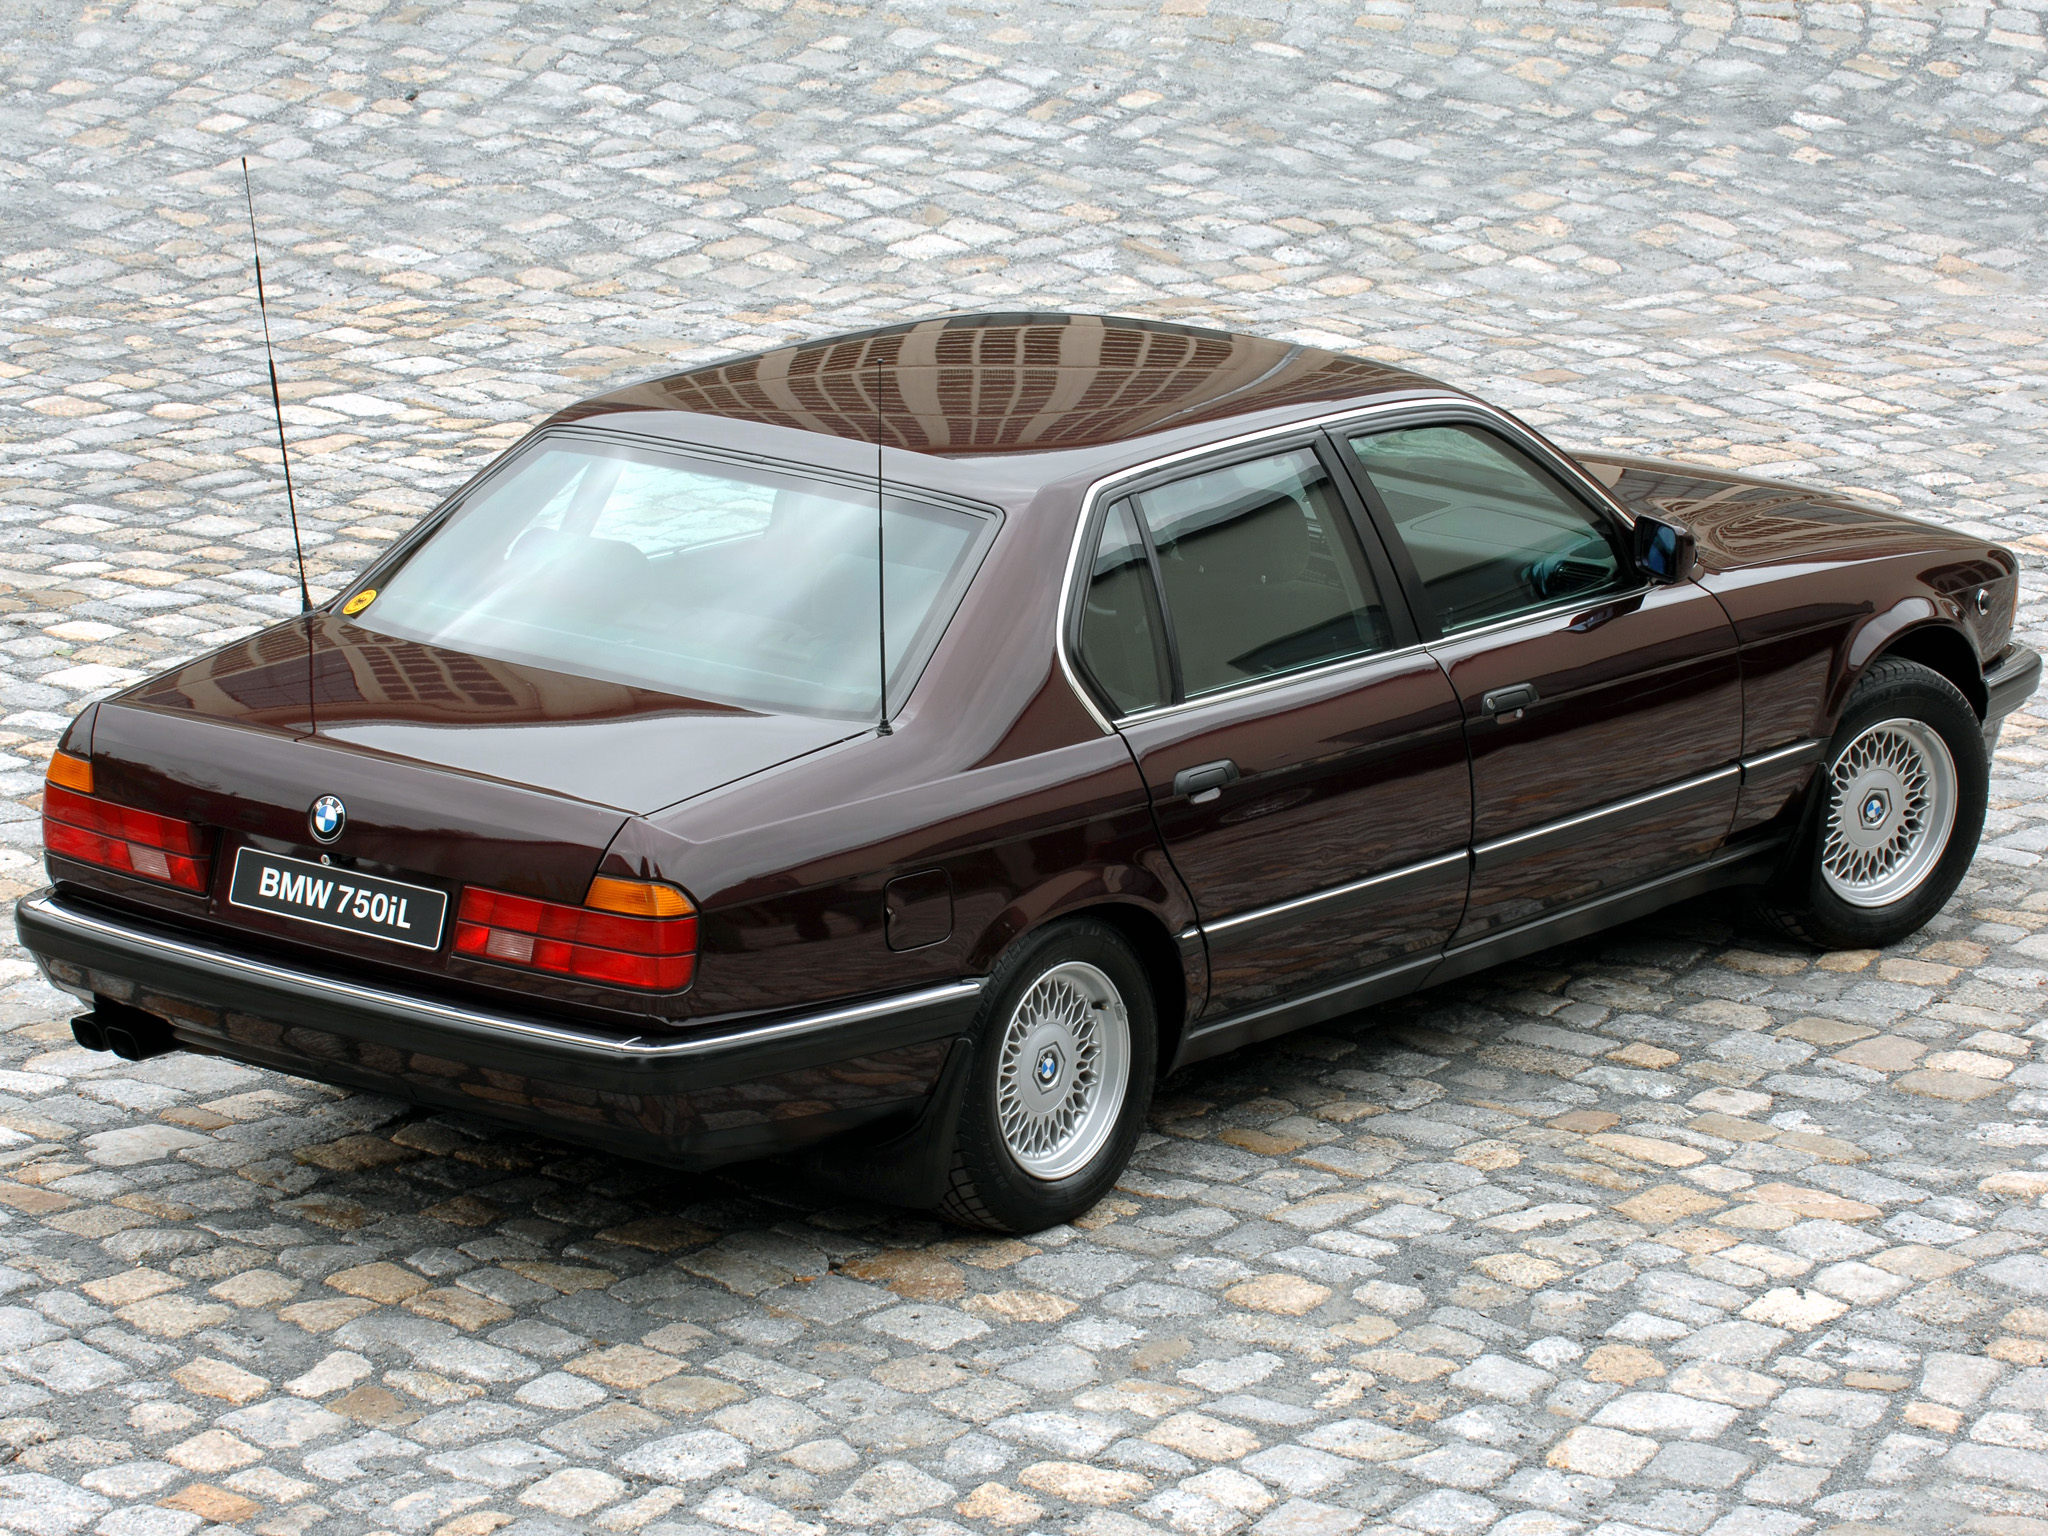 1987, Armored, Bmw, 750il, Security, E32, Luxury Wallpaper